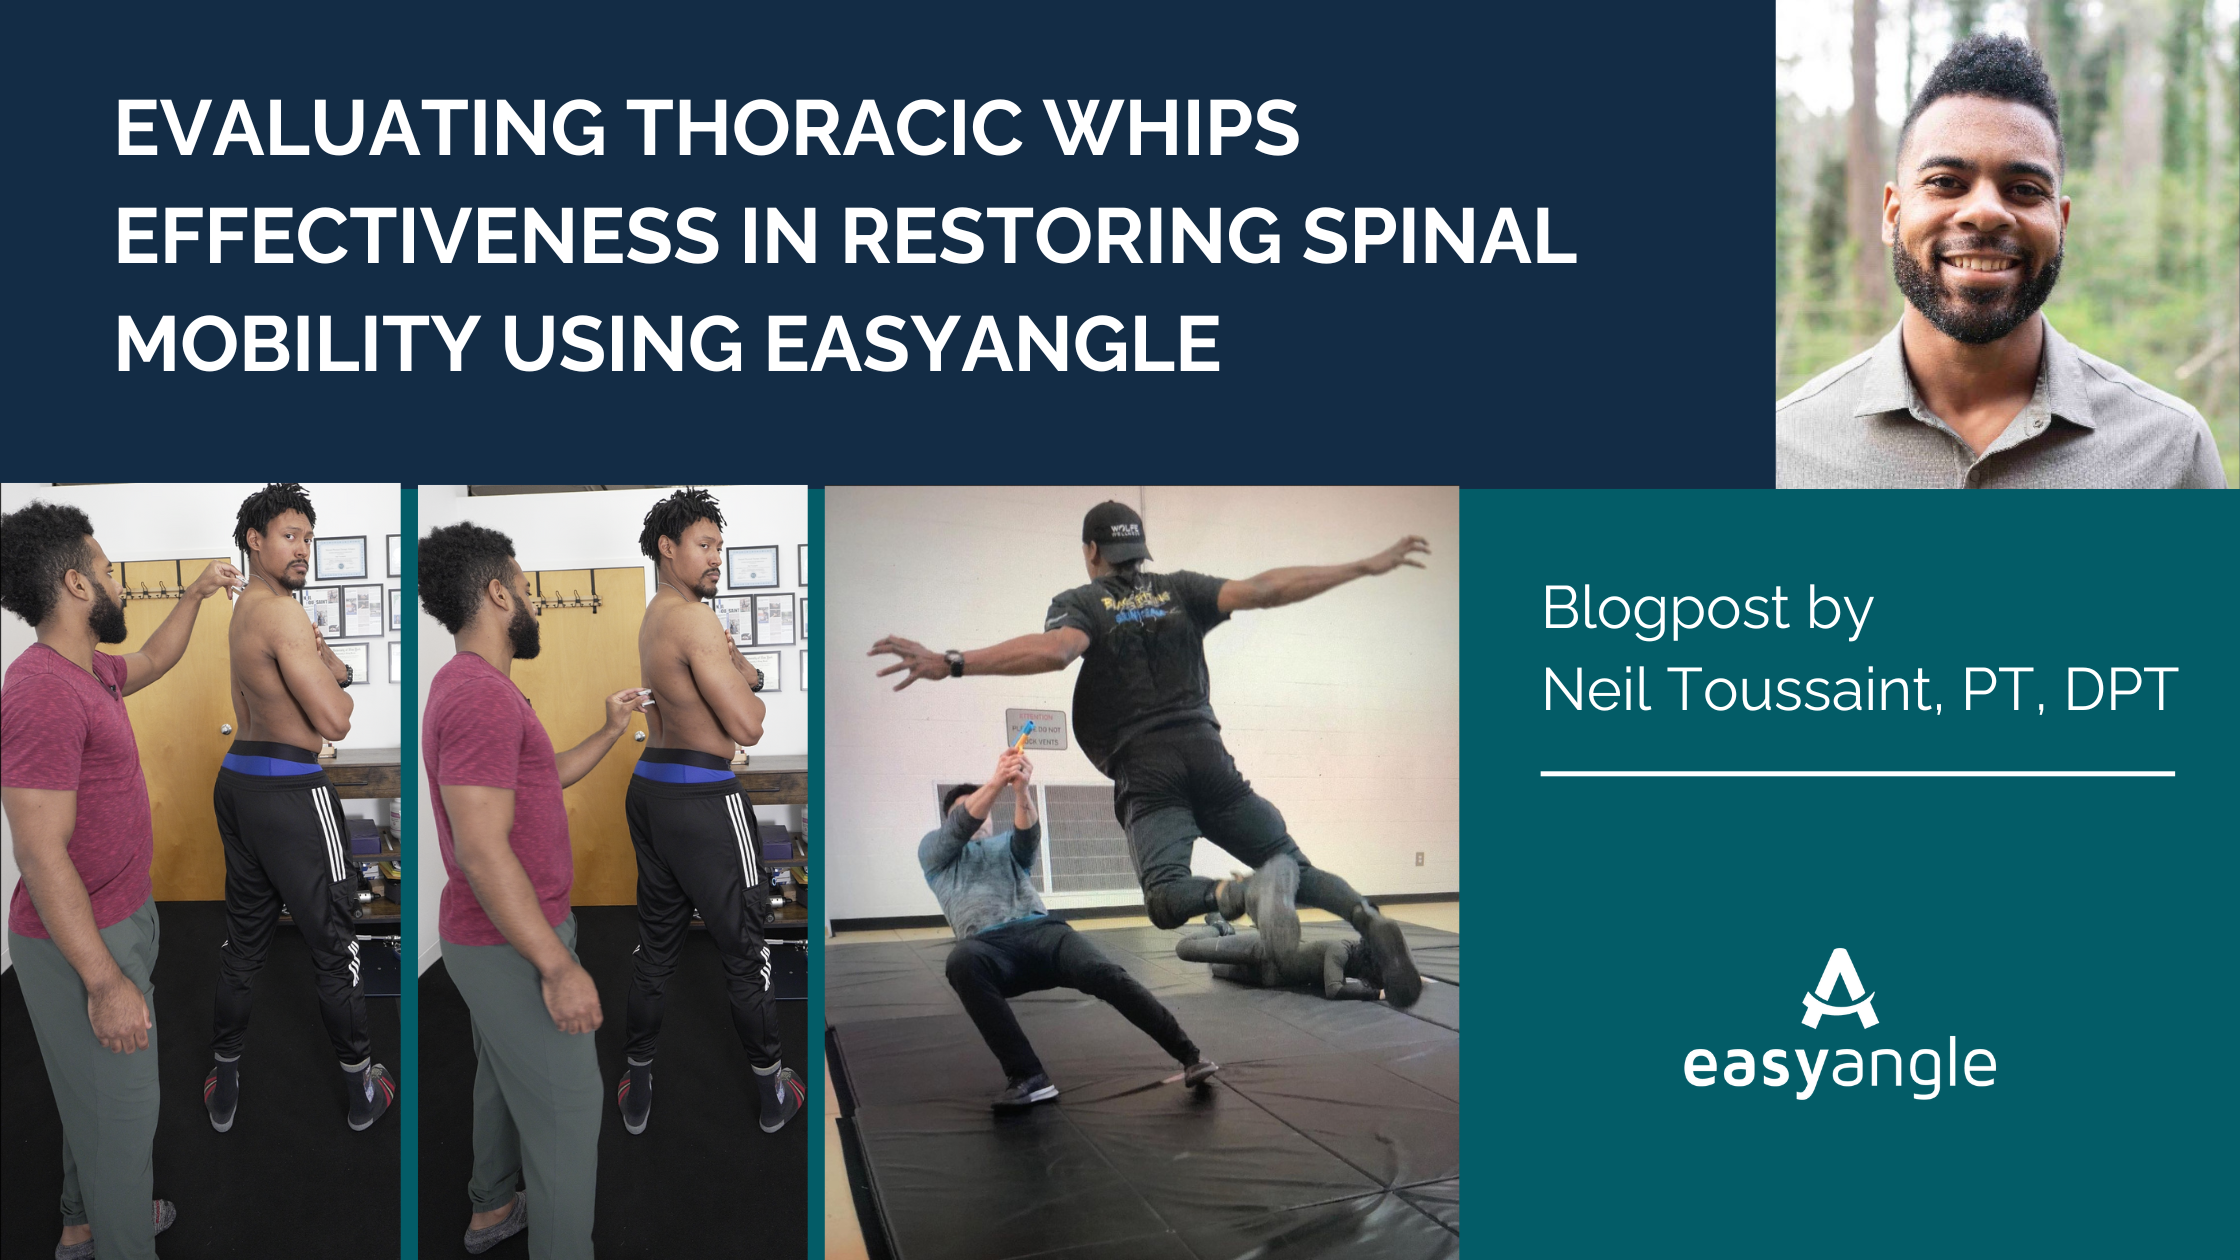 Evaluating Thoracic Whips Effectiveness in Restoring Spinal Mobility using EasyAngle